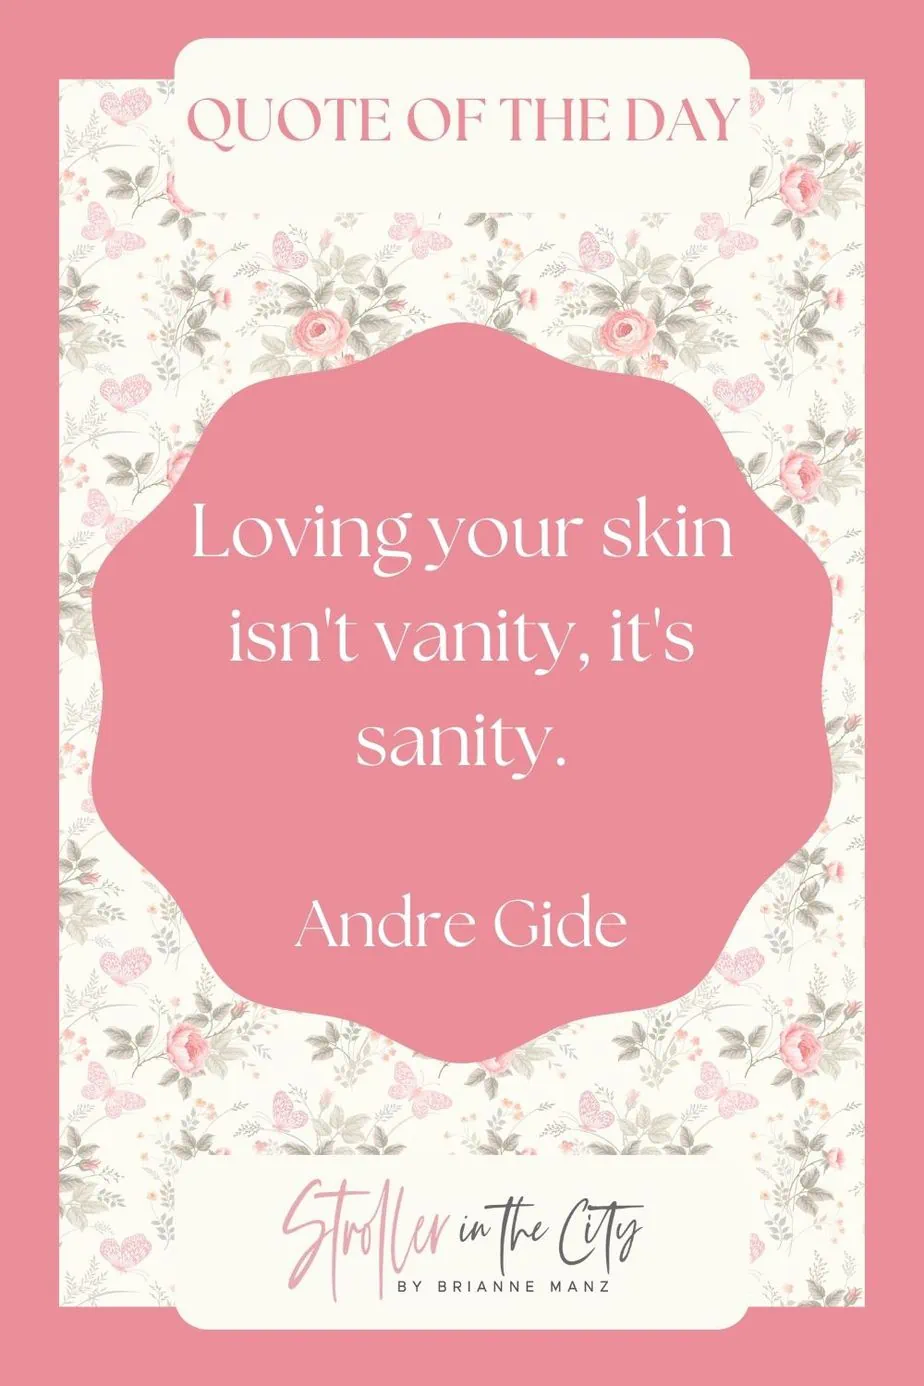 Skincare quote Text:/ "Loving you skin isn't vanity. It's sanity."